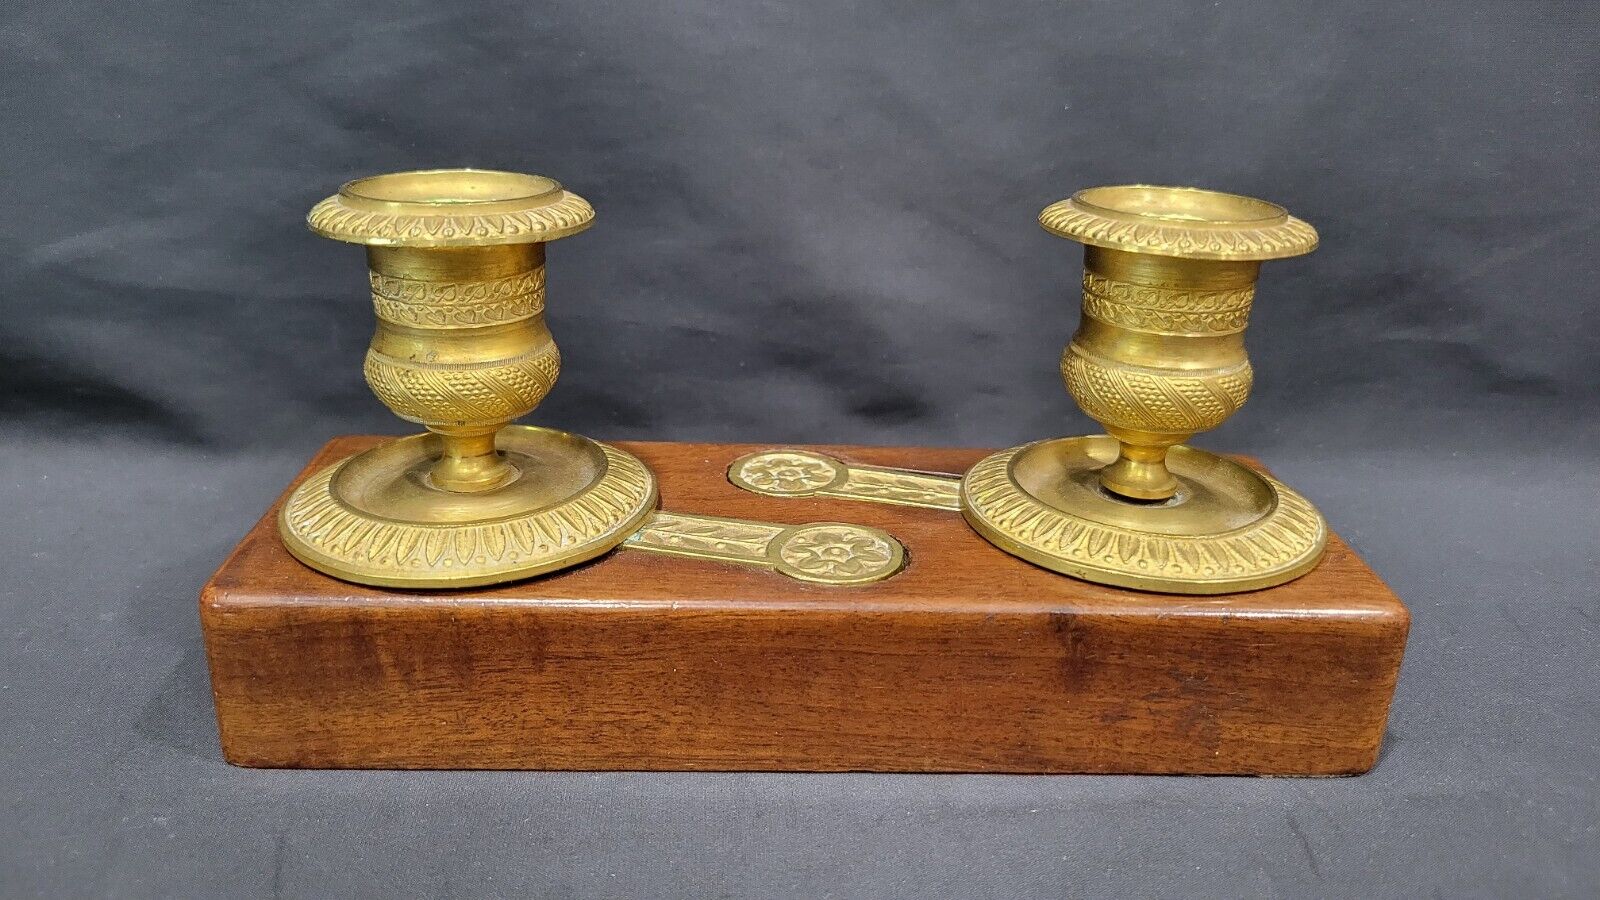 Rare ANTIQUE FRENCH BRONZE CANDLE HOLDERS w/ WOOD BASE